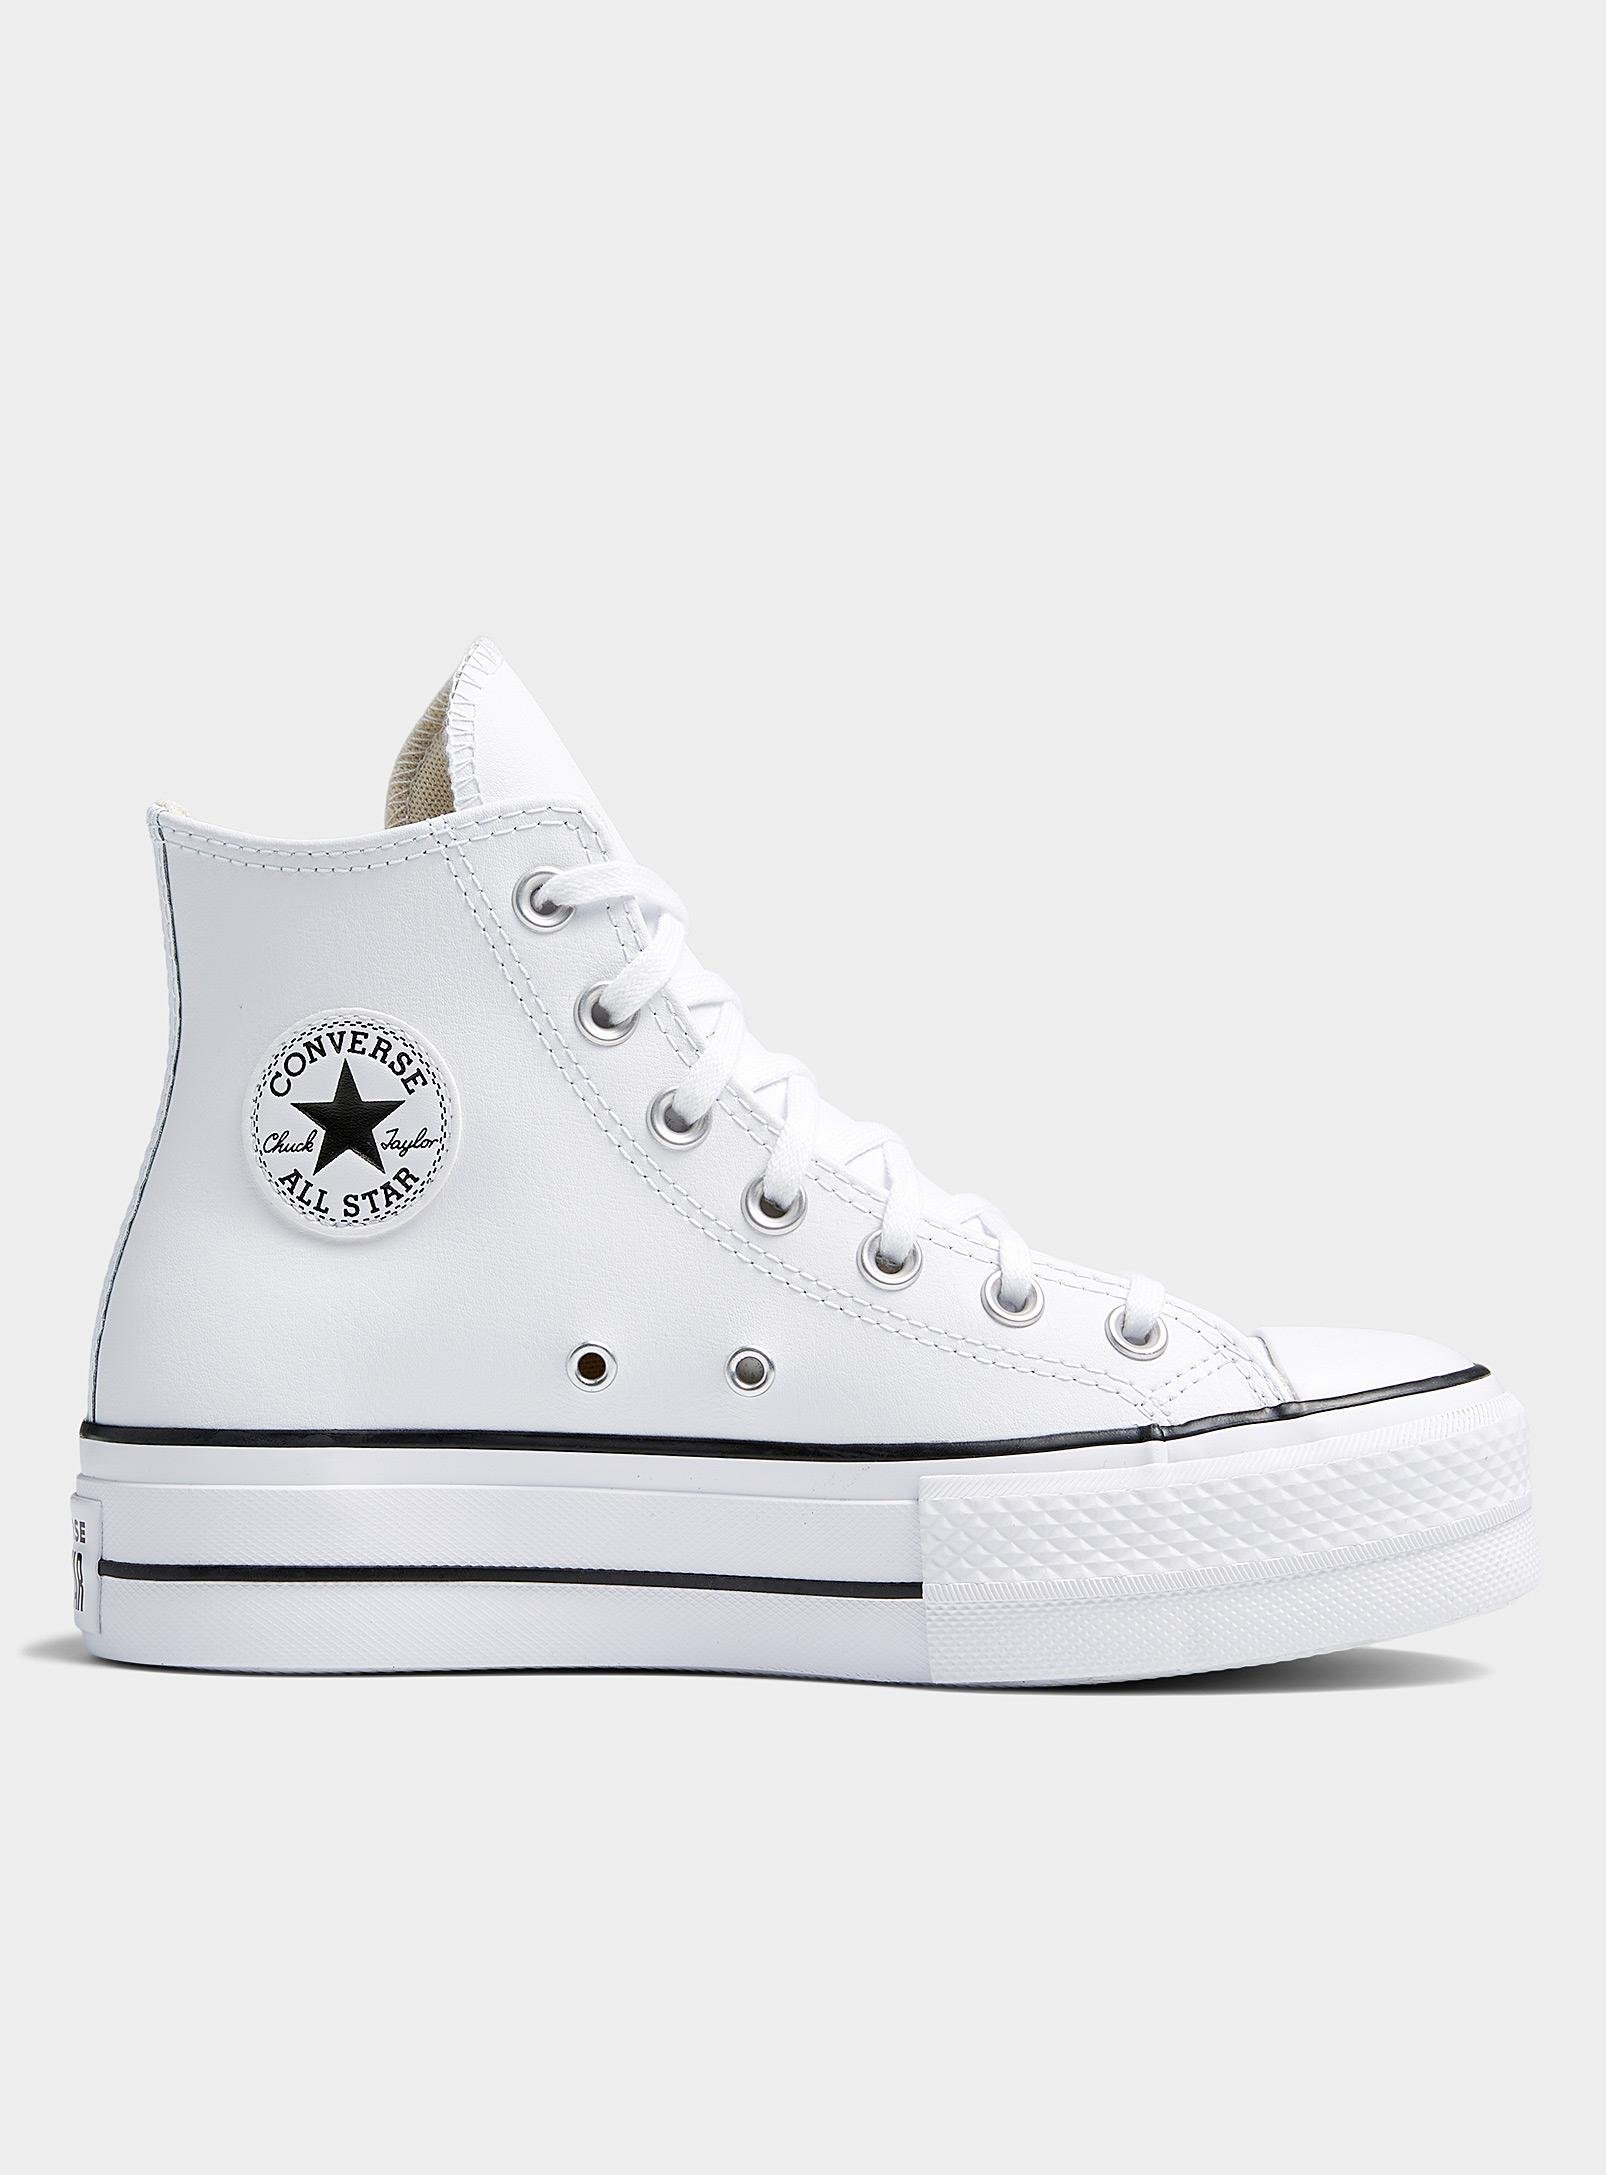 Converse Chuck Taylor All Star High Top White Leather Platform Sneaker  Women | Lyst